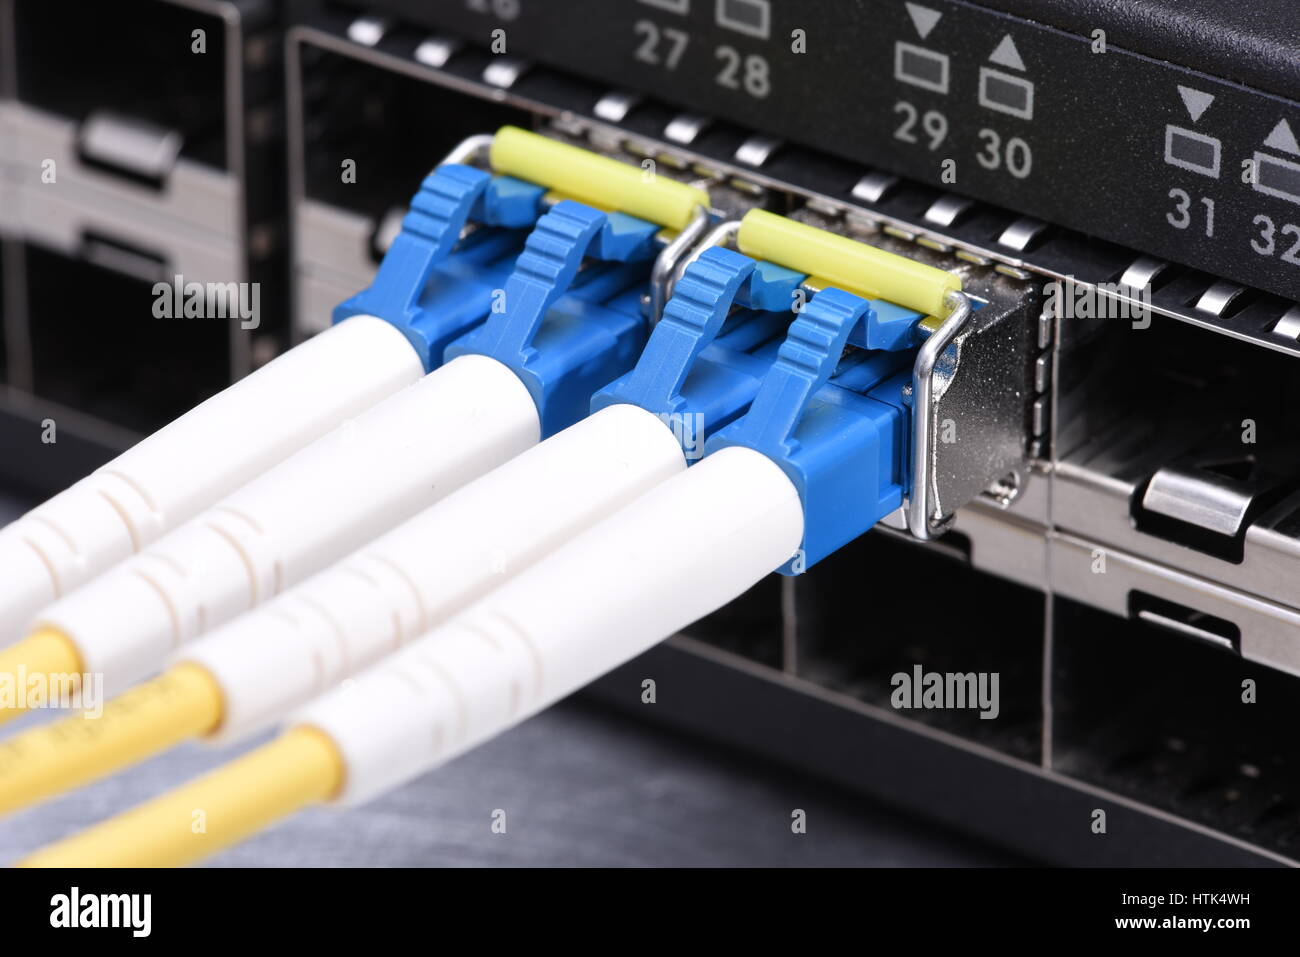 Internet Technology Devices Fiber Optic Network Cables in Switch Stock Photo